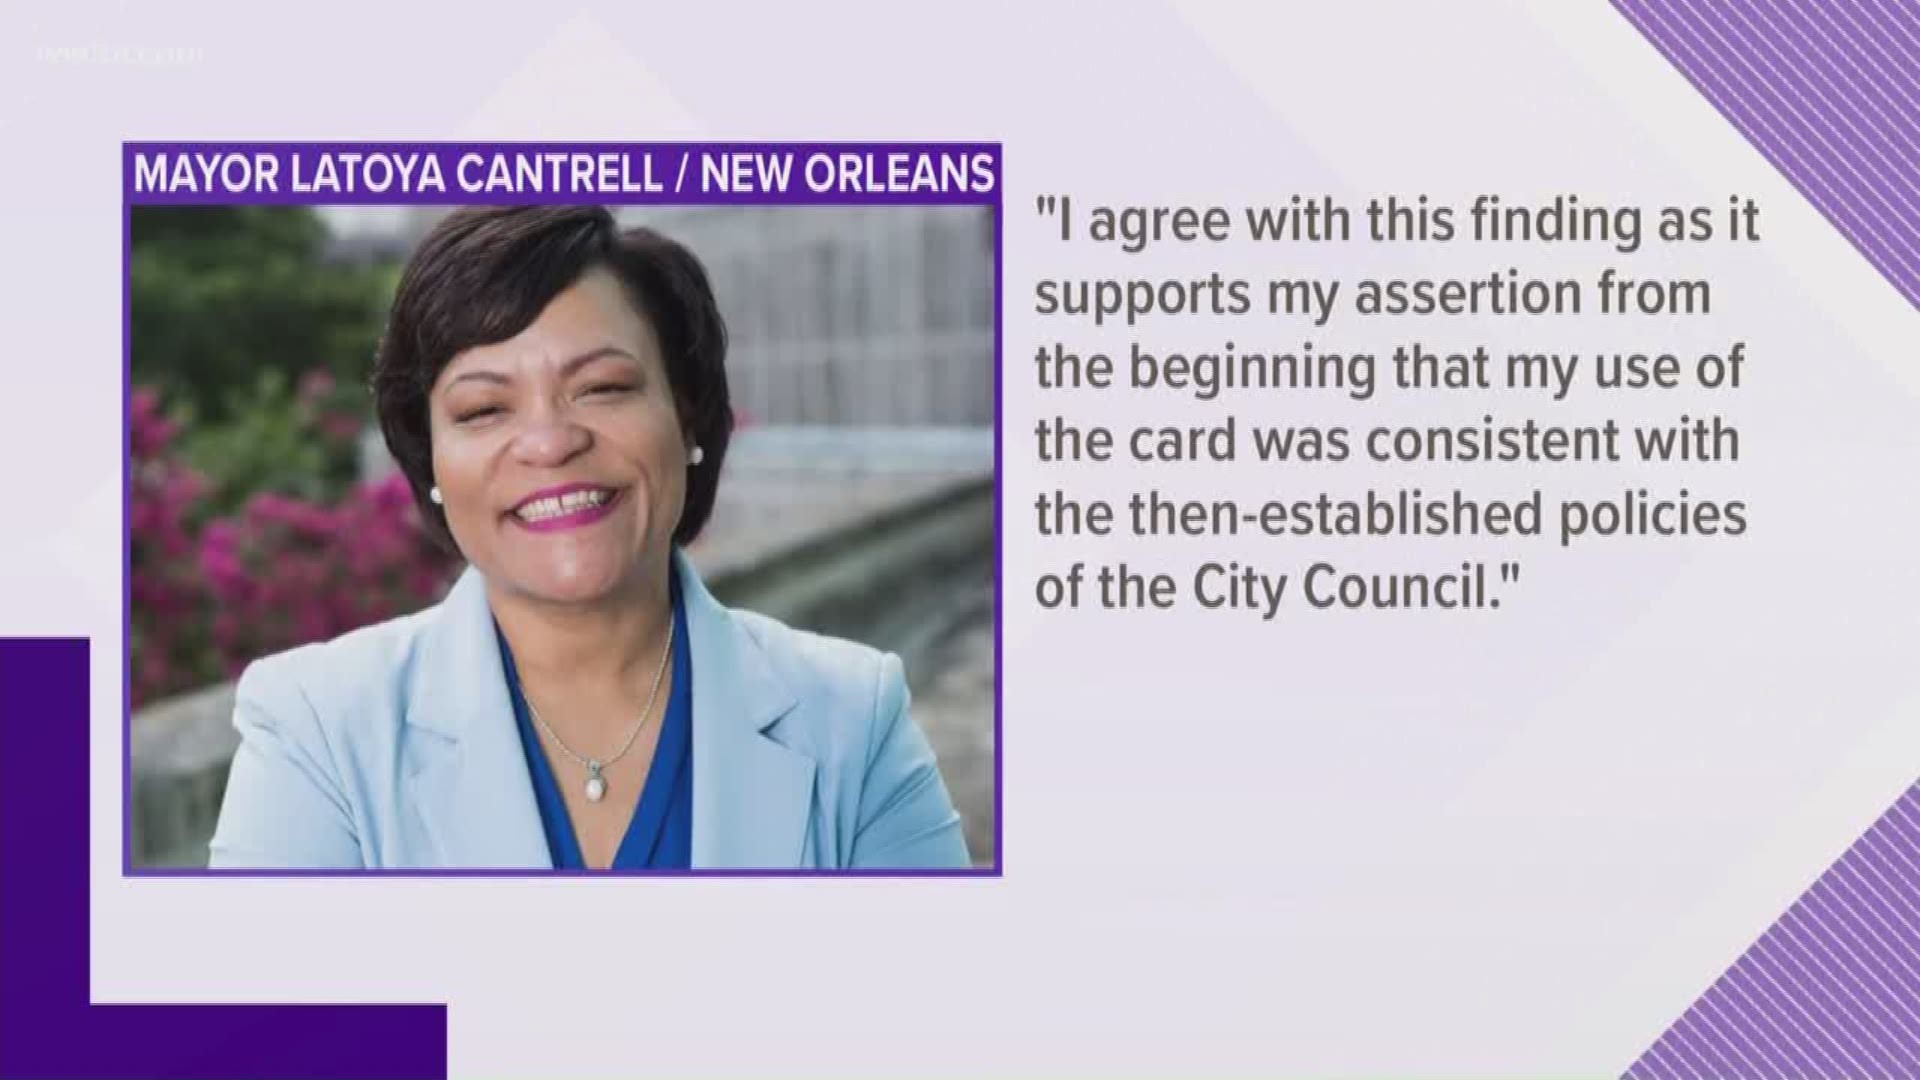 A report has found that the credit card usage of then-council member LaToya Cantrell was questionable, but was in line with what other Orleans Parish council members were doing at the time.